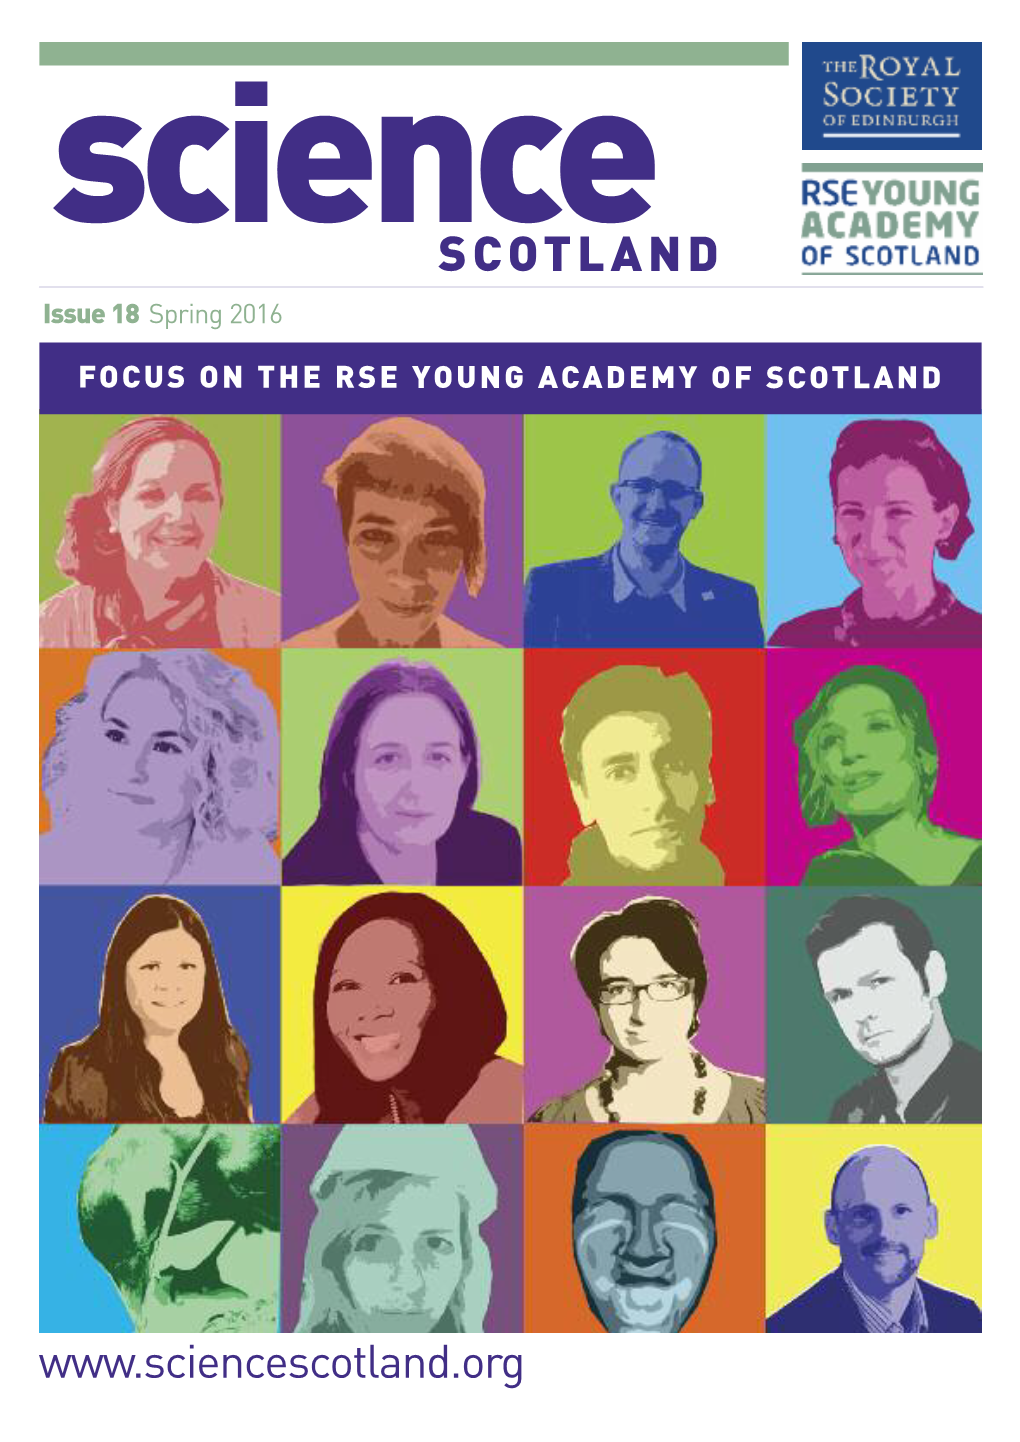 Science SCOTLAND Issue 18 Spring 2016